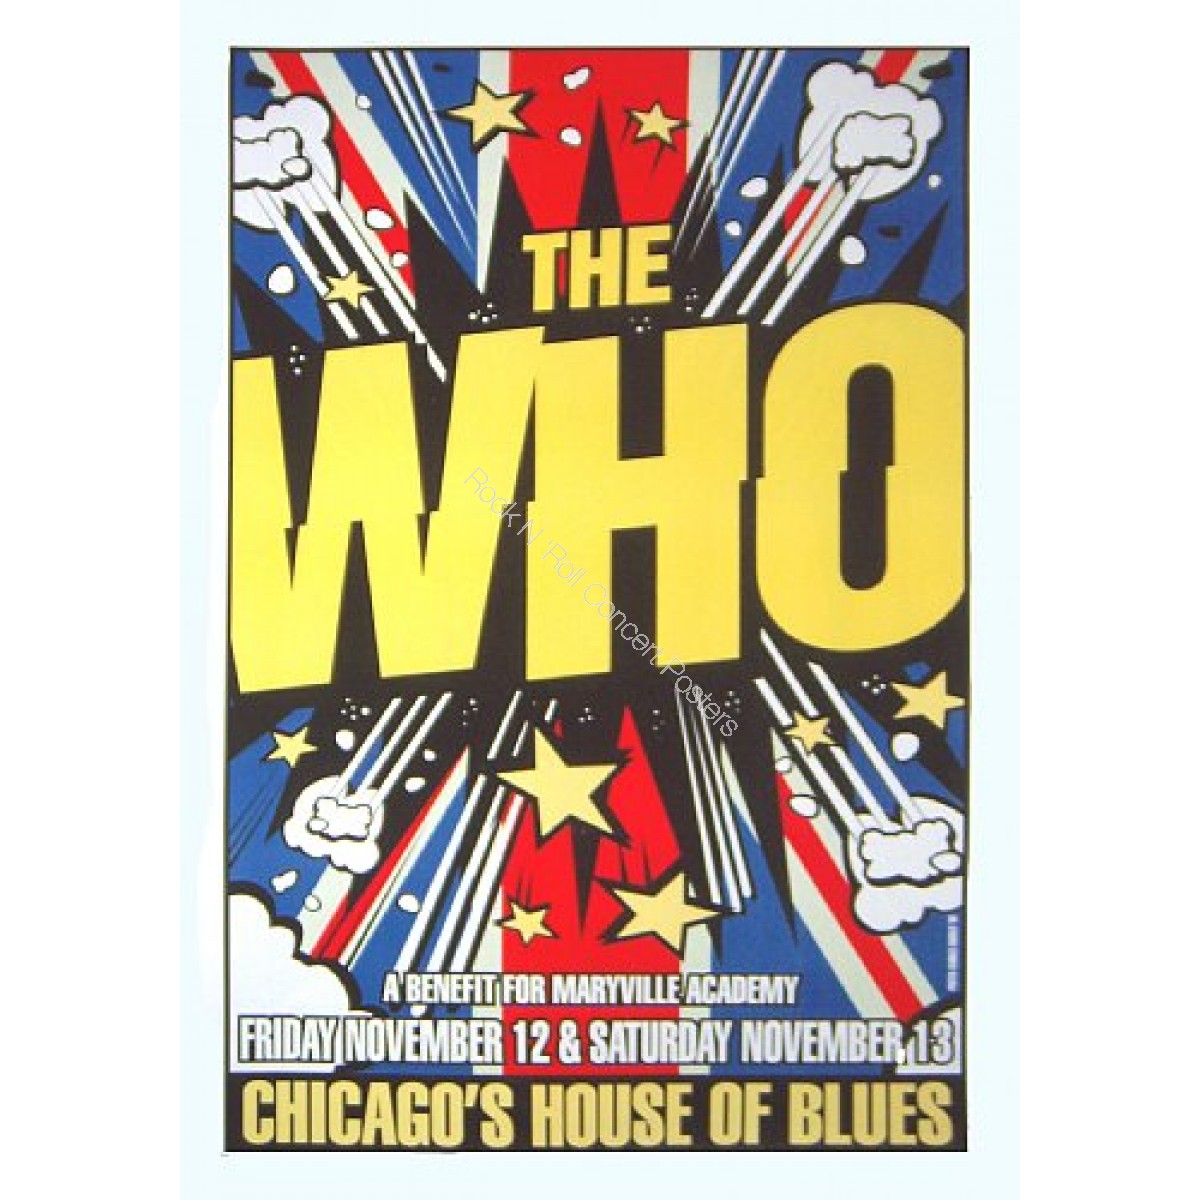 The Who @ The House Of Blues Chicago 11/12-13-99 | Concert Posters For ...